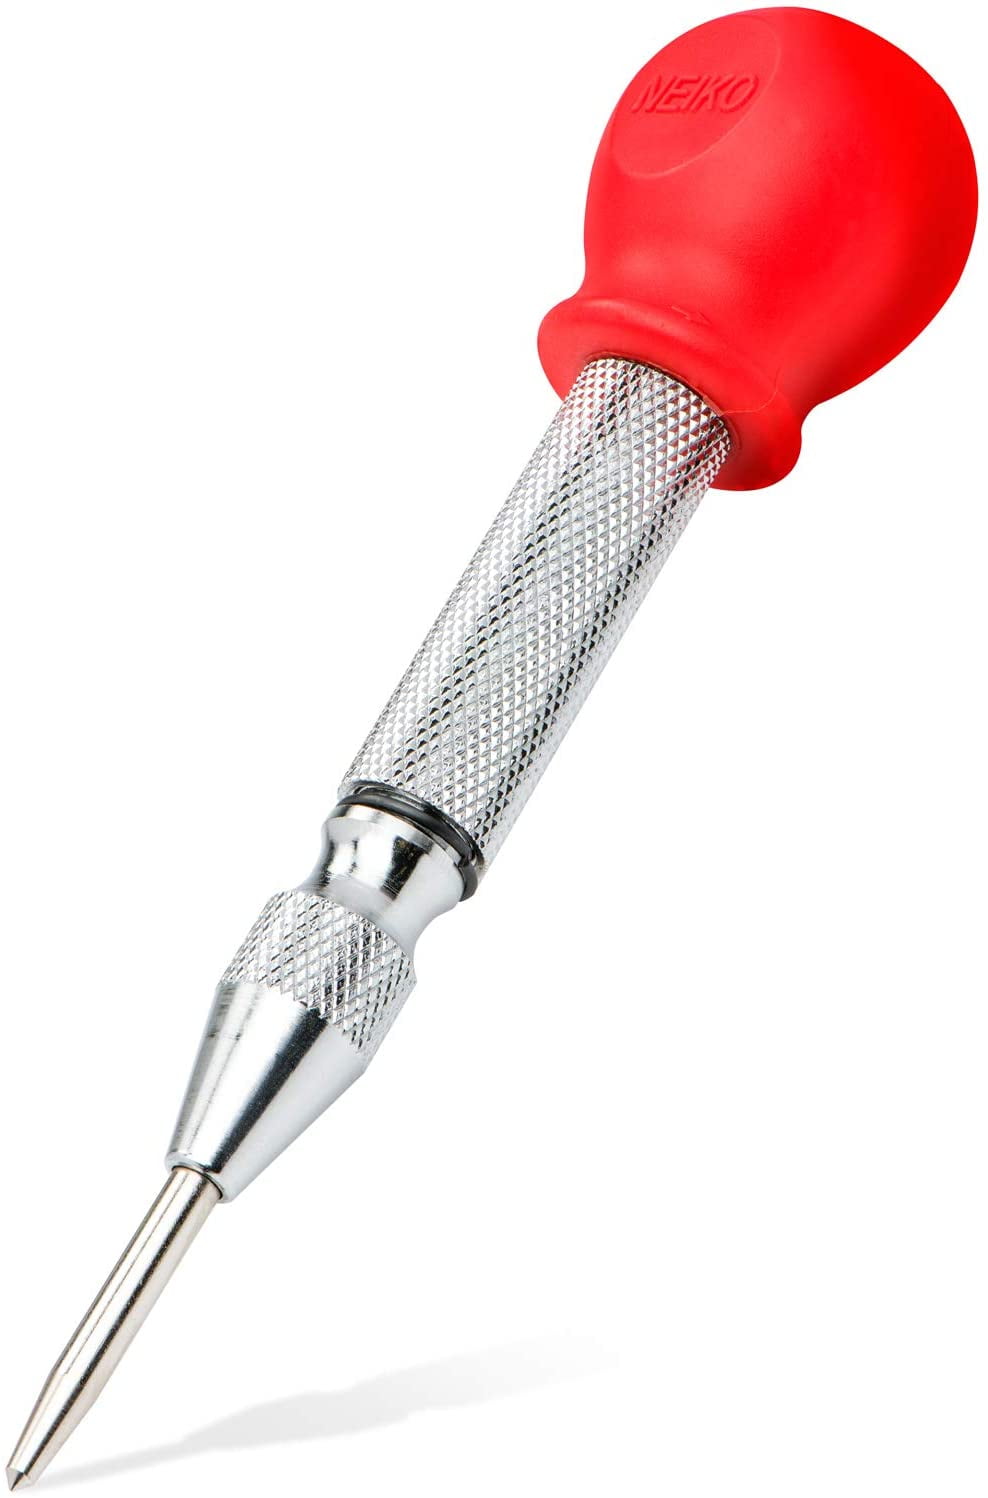 Segomo Tools 5 Inch Precision Diamond Knurled S2 Steel (58-60) Automatic  Center Punch, Punch Tool, Spring Loaded Center Punch, Auto Center Punch